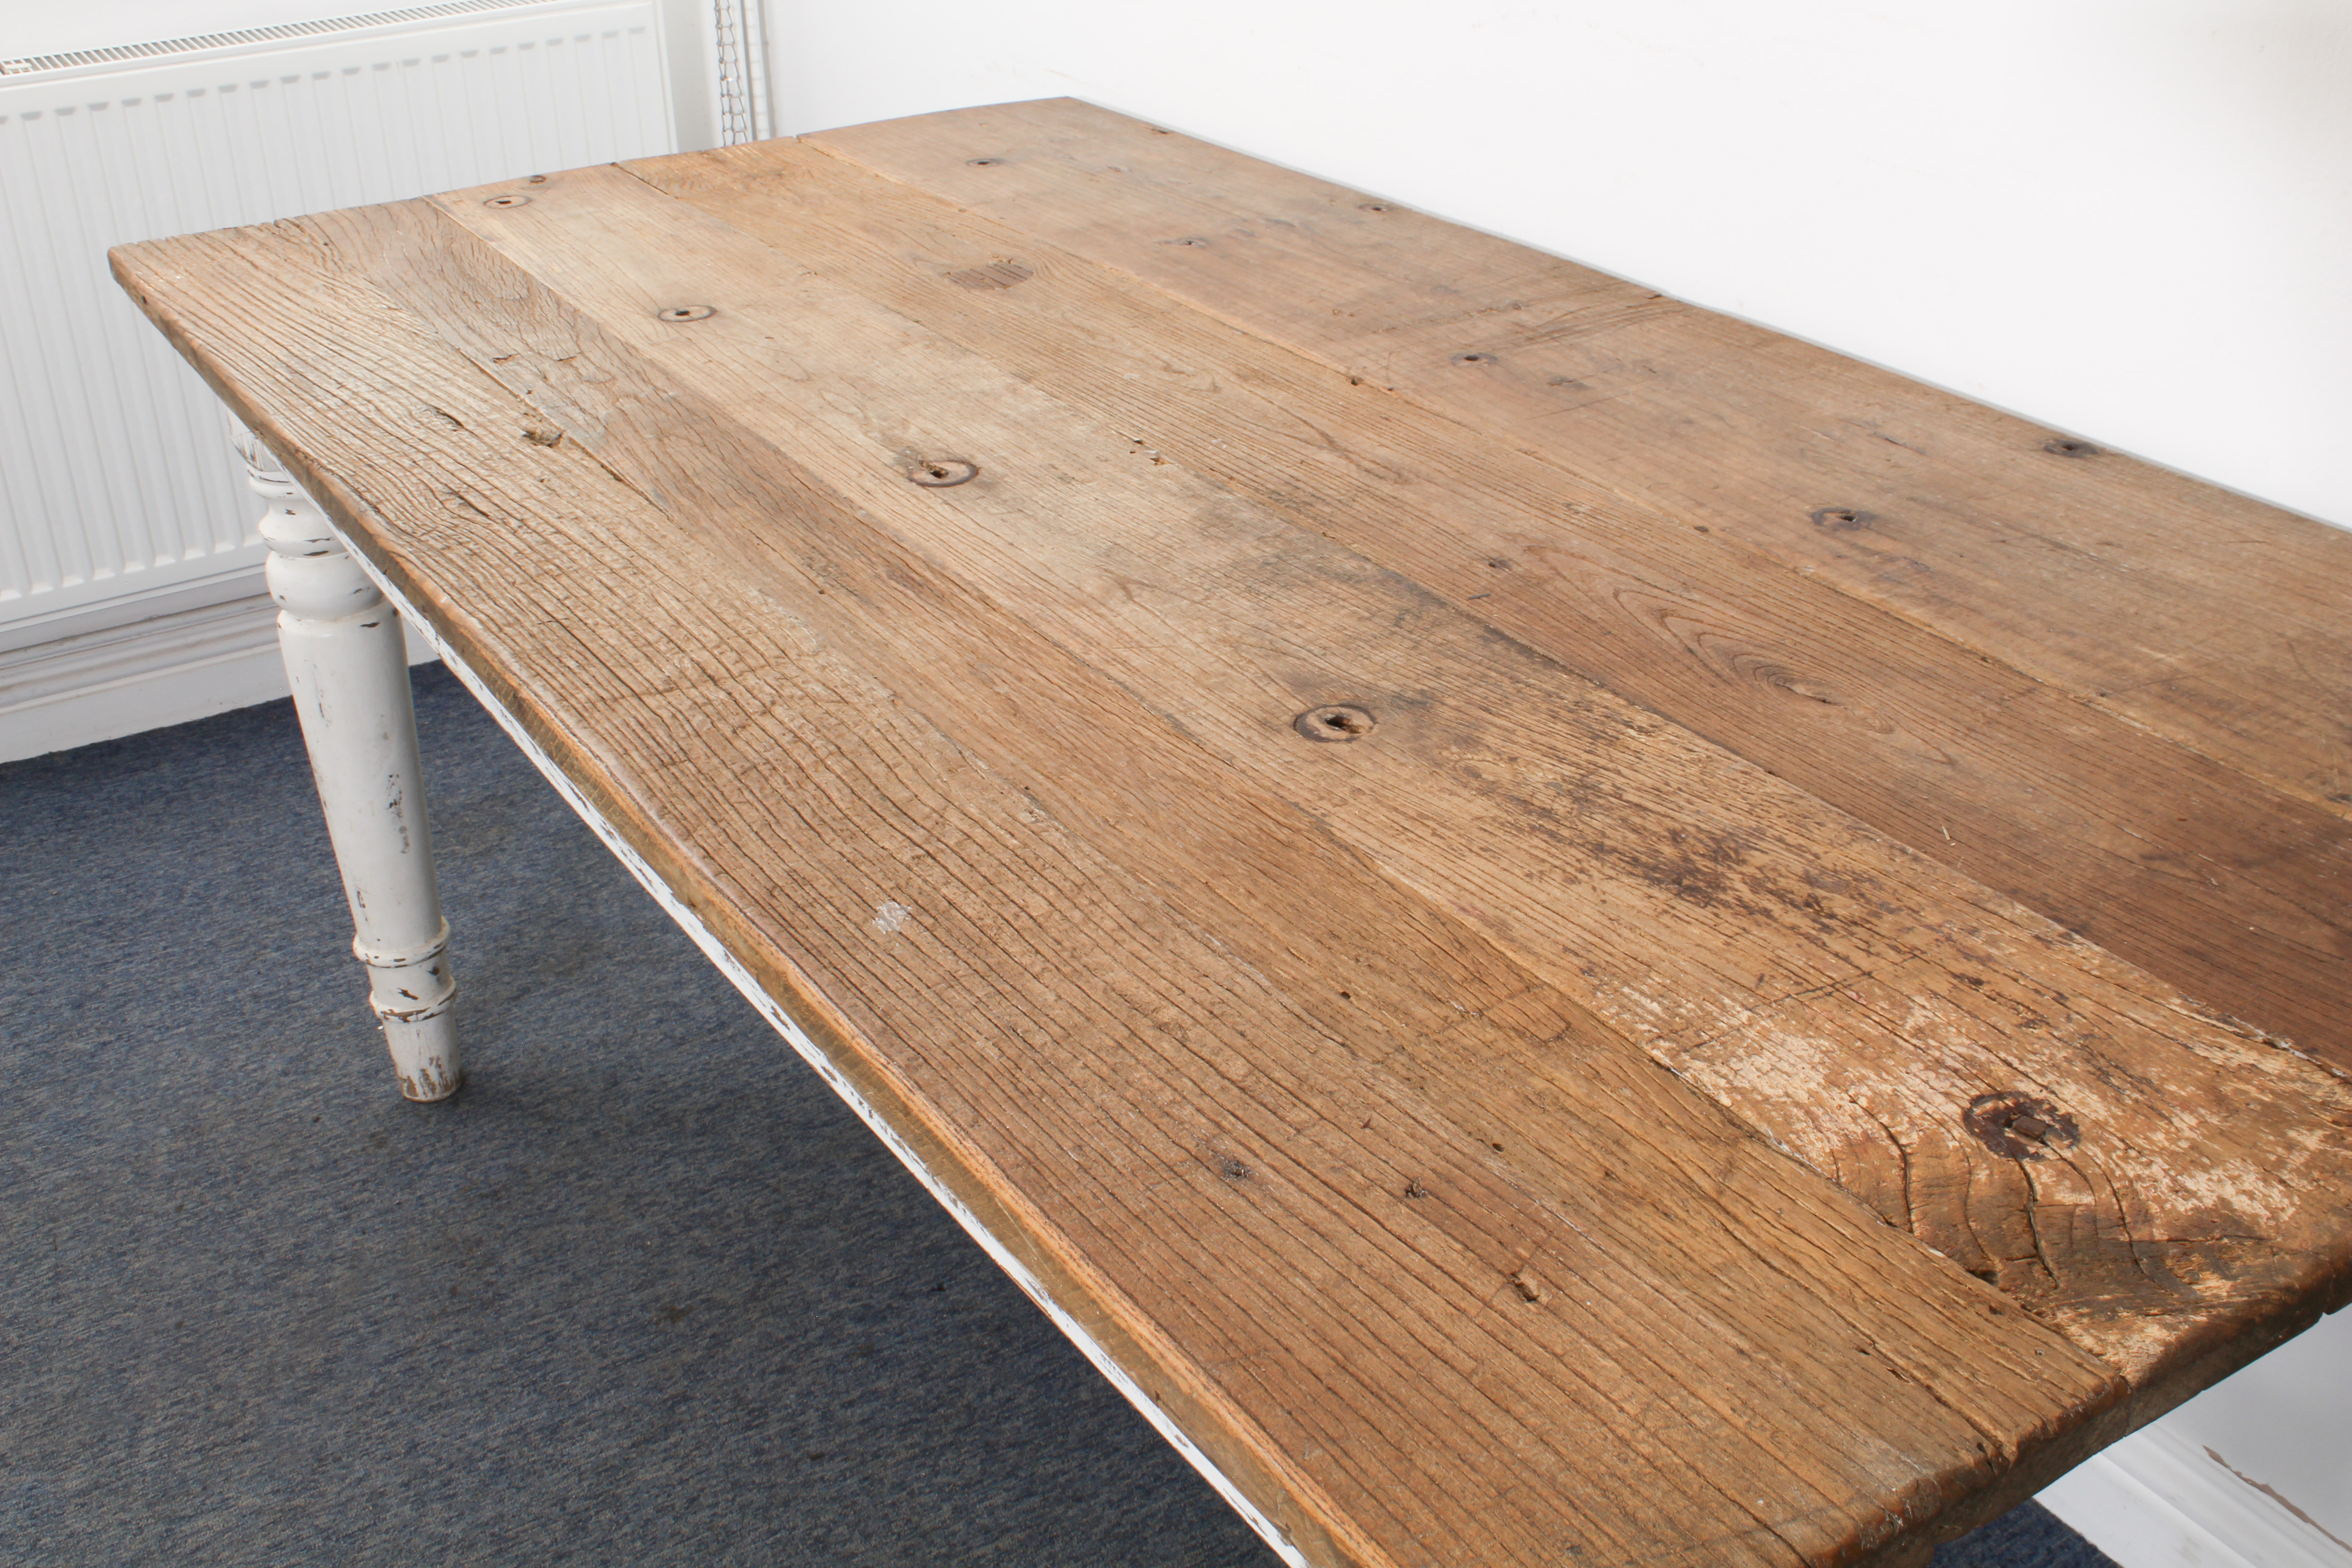 An oak farmhouse kitchen dining table in 19th century style - the rustic, planked top raised on an - Image 7 of 7